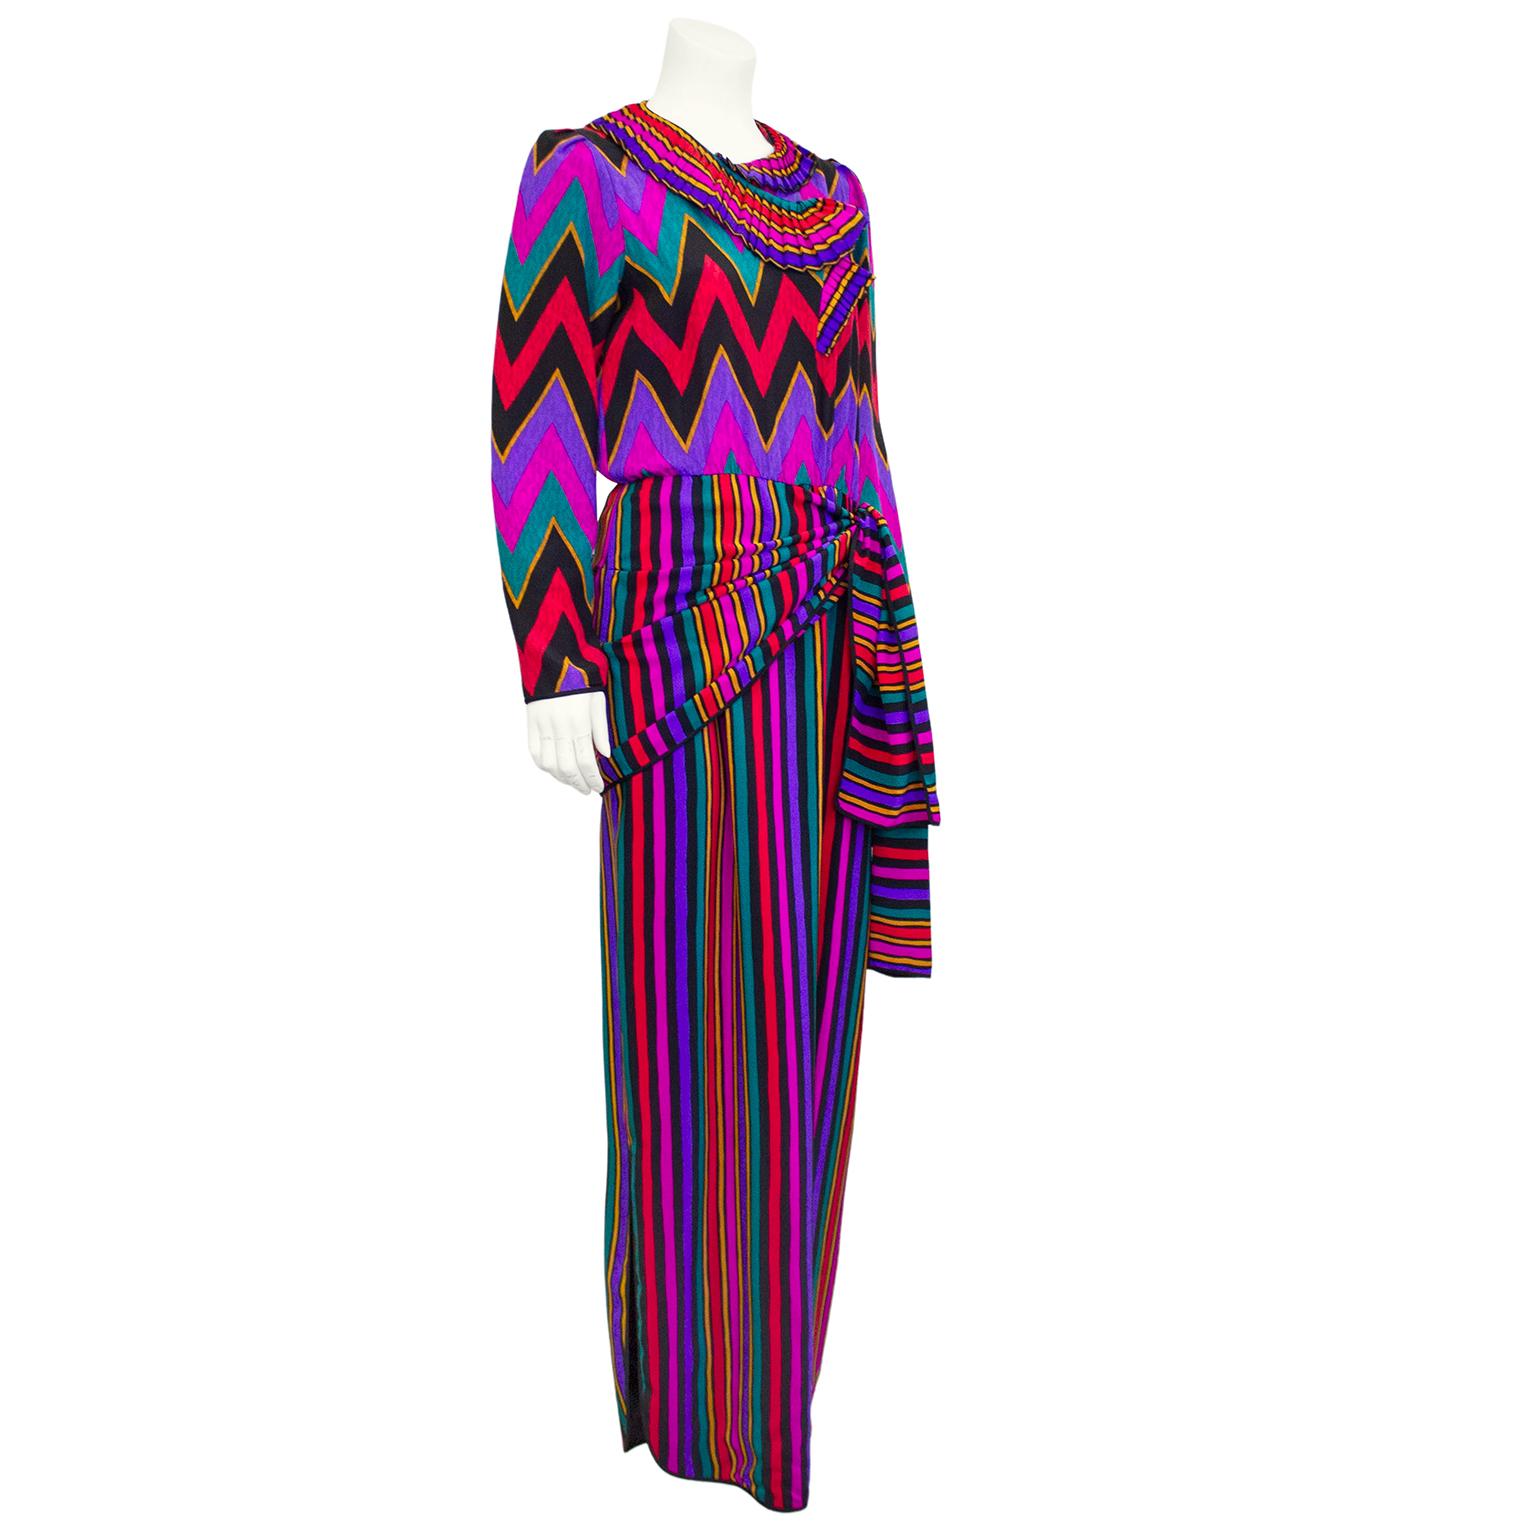 Stunning vibrant 1970's French printed silk dress with pleated collar, long sleeves and a wrap feature at the waist. Although it sounds like a lot, all the elements work so well together on this elegant day/dinner dress. Pair with black boots and a